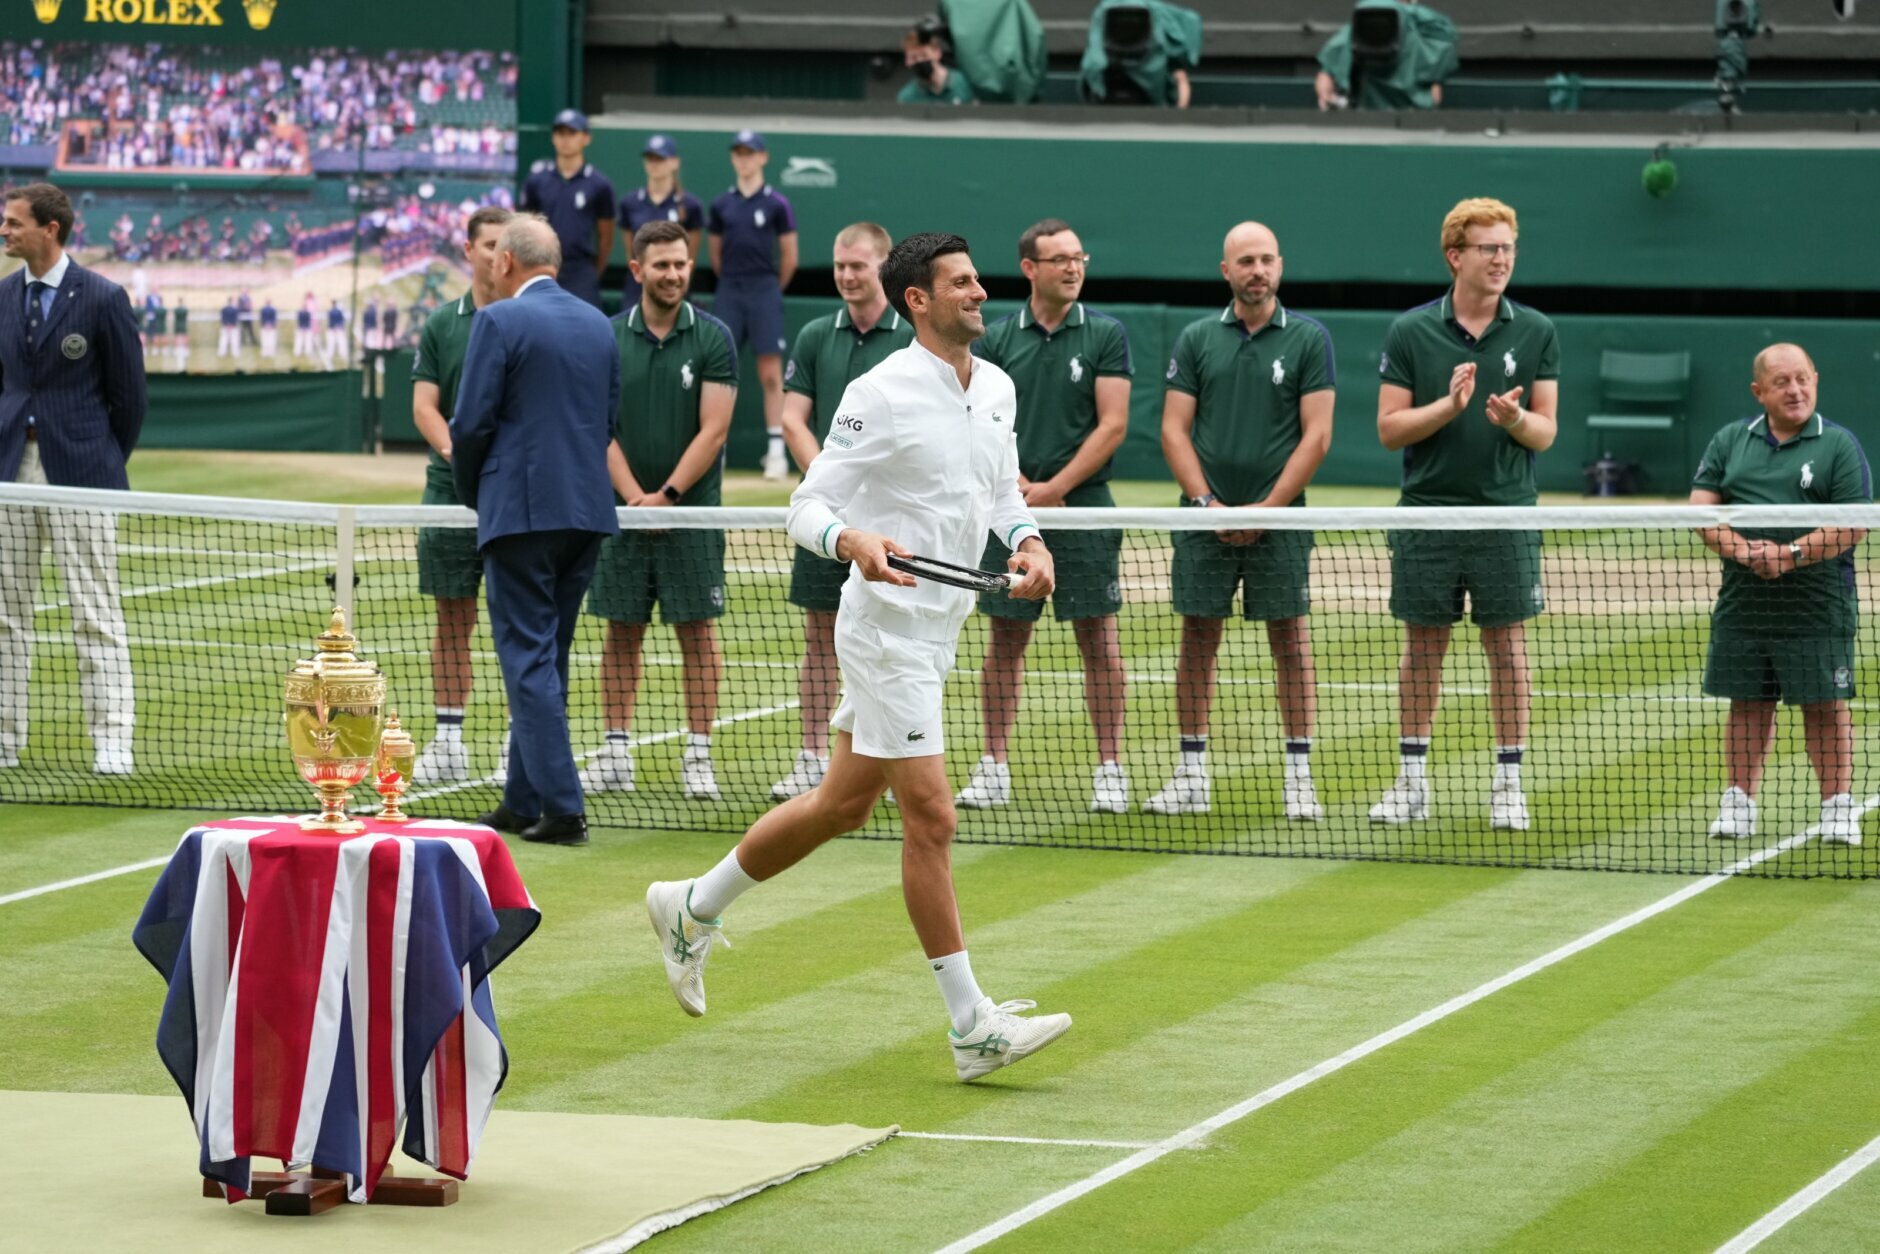 Roger Federer and Novak Djokovic make history by playing in first ever  fifth-set tie-breaker at Wimbledon 2019 – The Sun